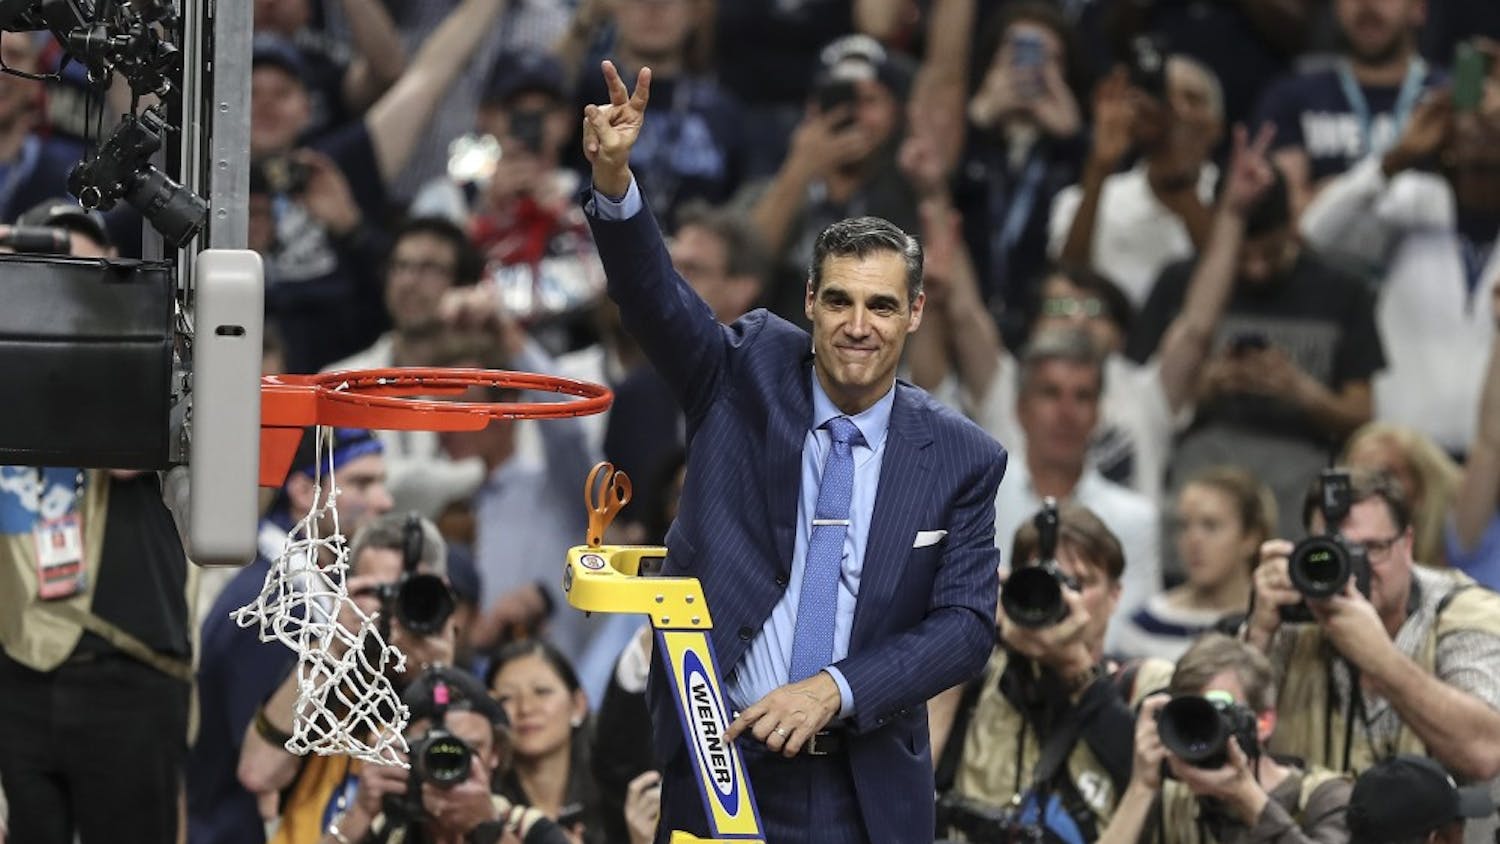 Villanova head coach Jay Wright waves the Villanova "V" to the fans while cutting the net after beating Michigan to win the NCAA National Championship on Monday, April 2, 2018, at the Alamodome in San Antonio, Texas. The Villanova team is the National Champion, beating Michigan 79-62.&nbsp;